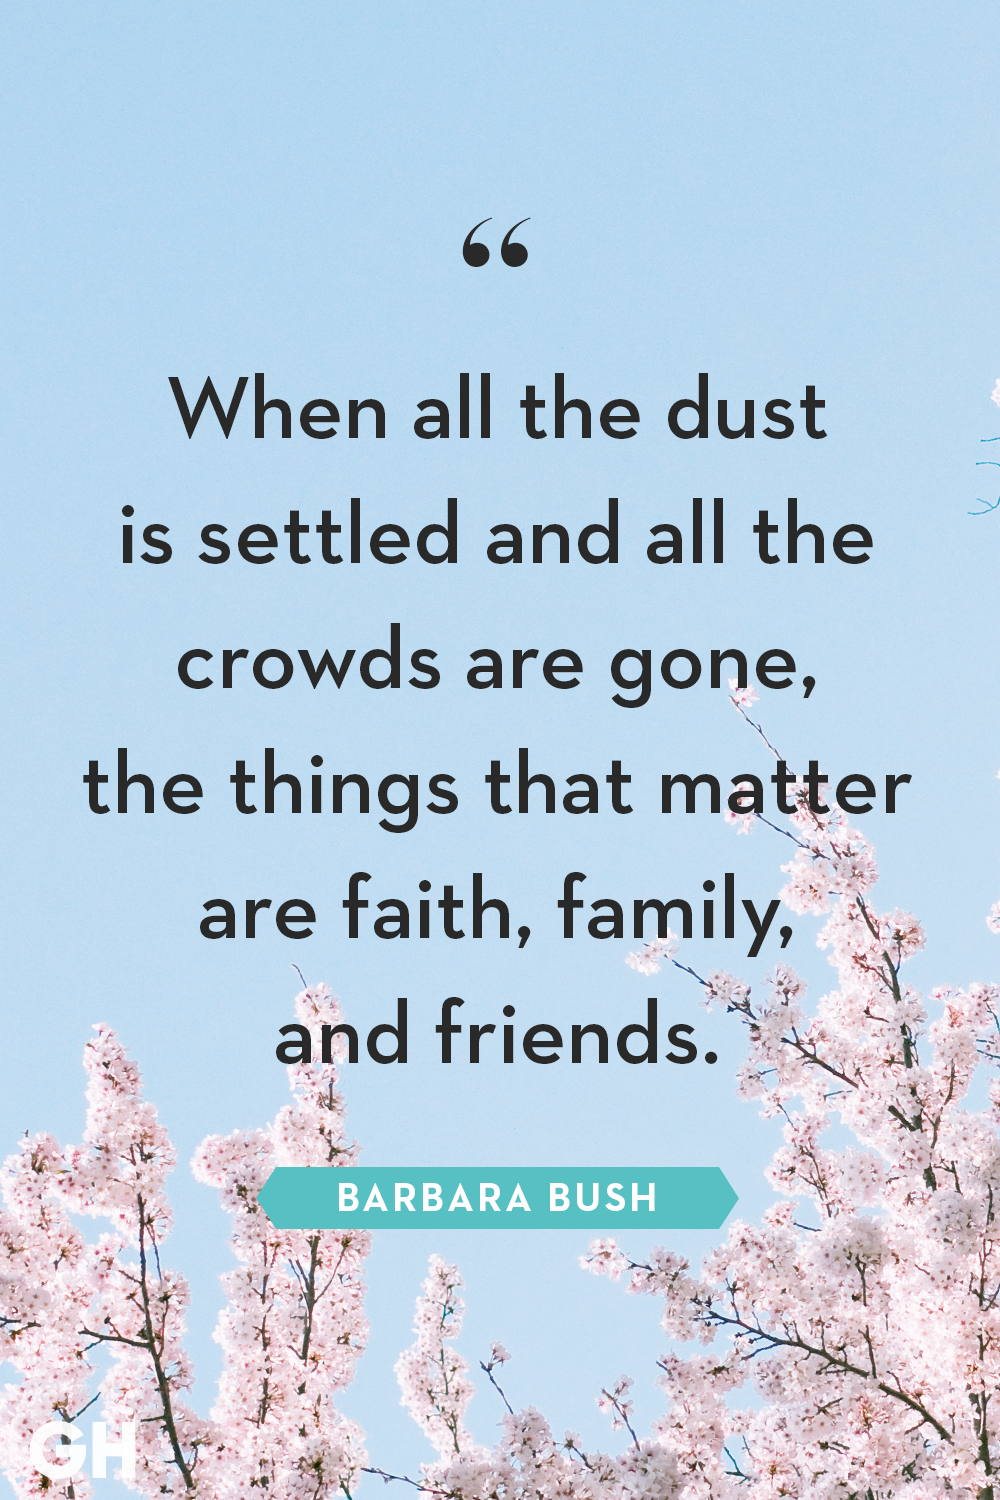 when all the dust is settled and all the crowds are gone, the things that matter are faith, family and friends. barbara bush